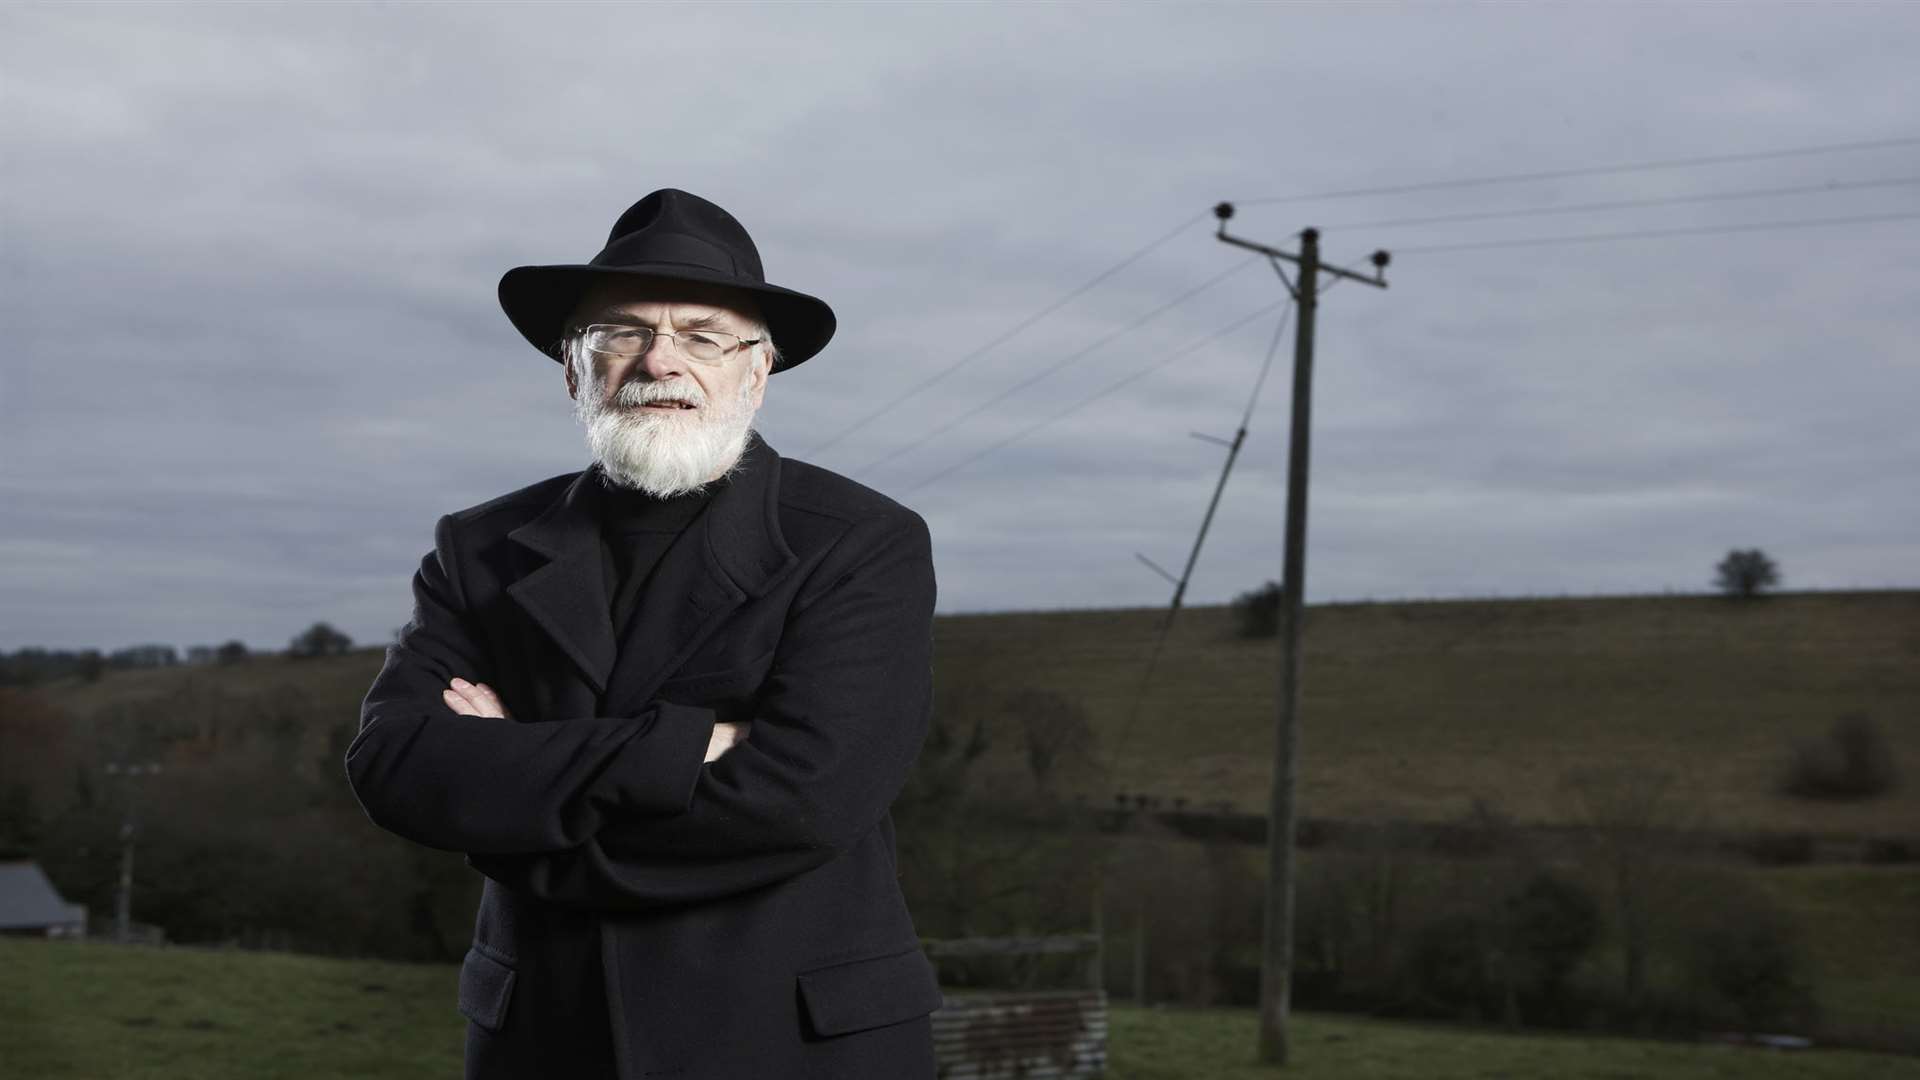 Terry Pratchett's Discworld series have inspired the festival's events